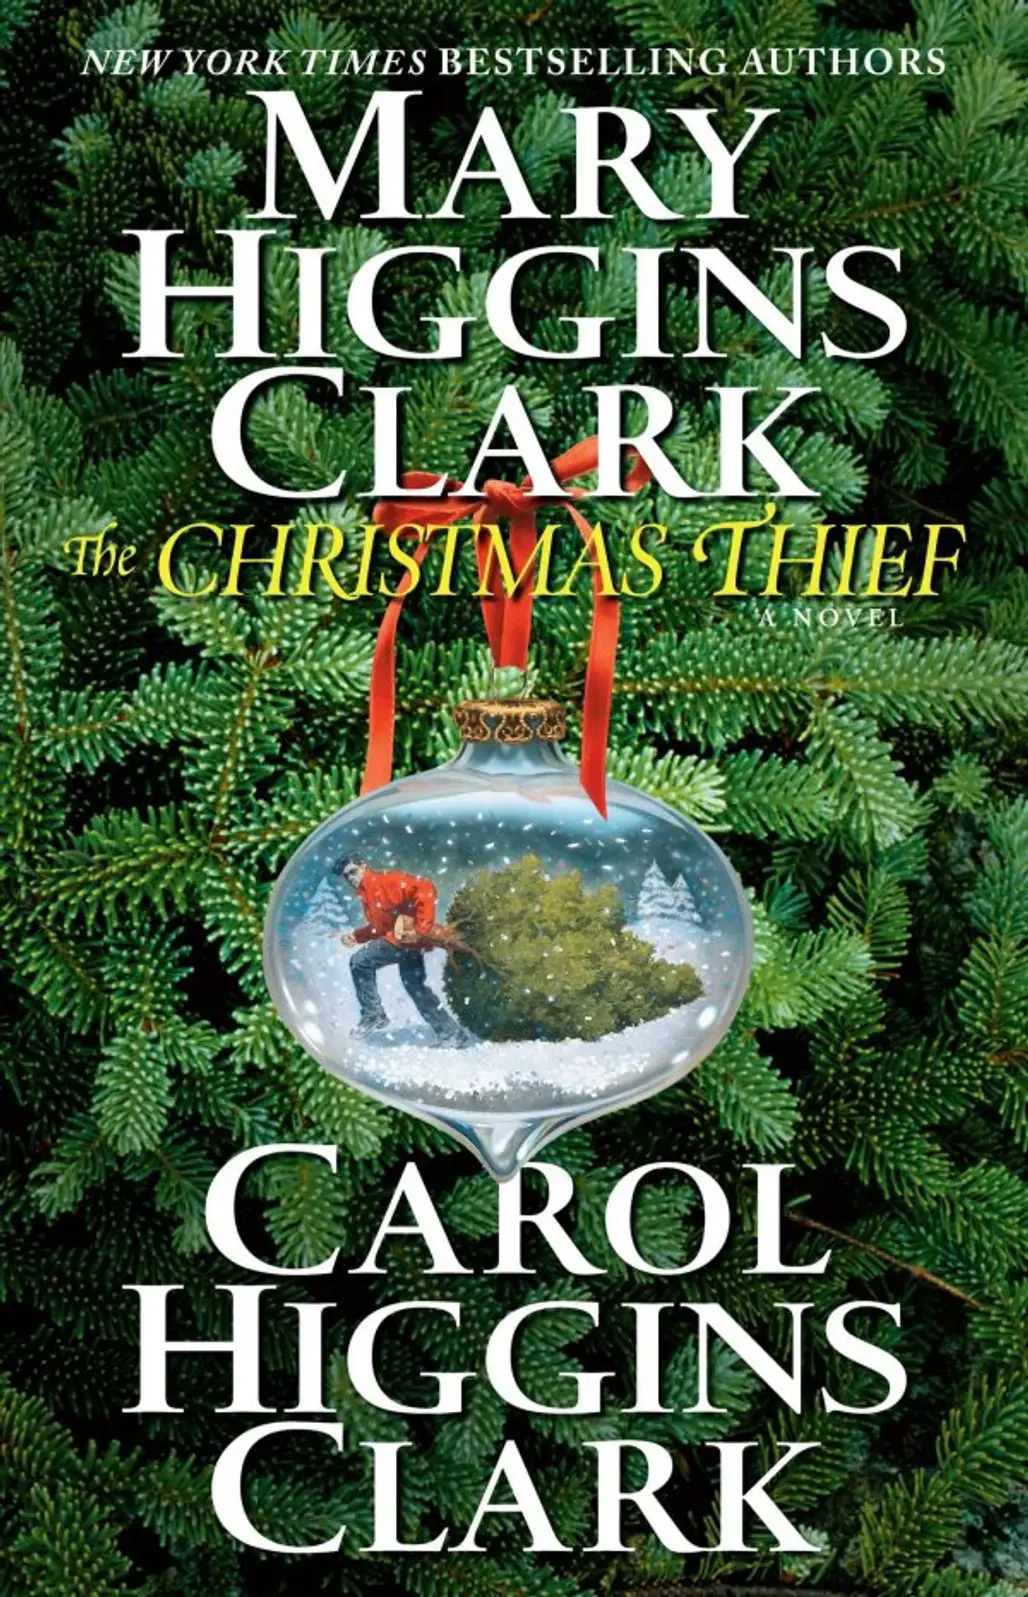 The Christmas Thief by Mary Higgins Clark